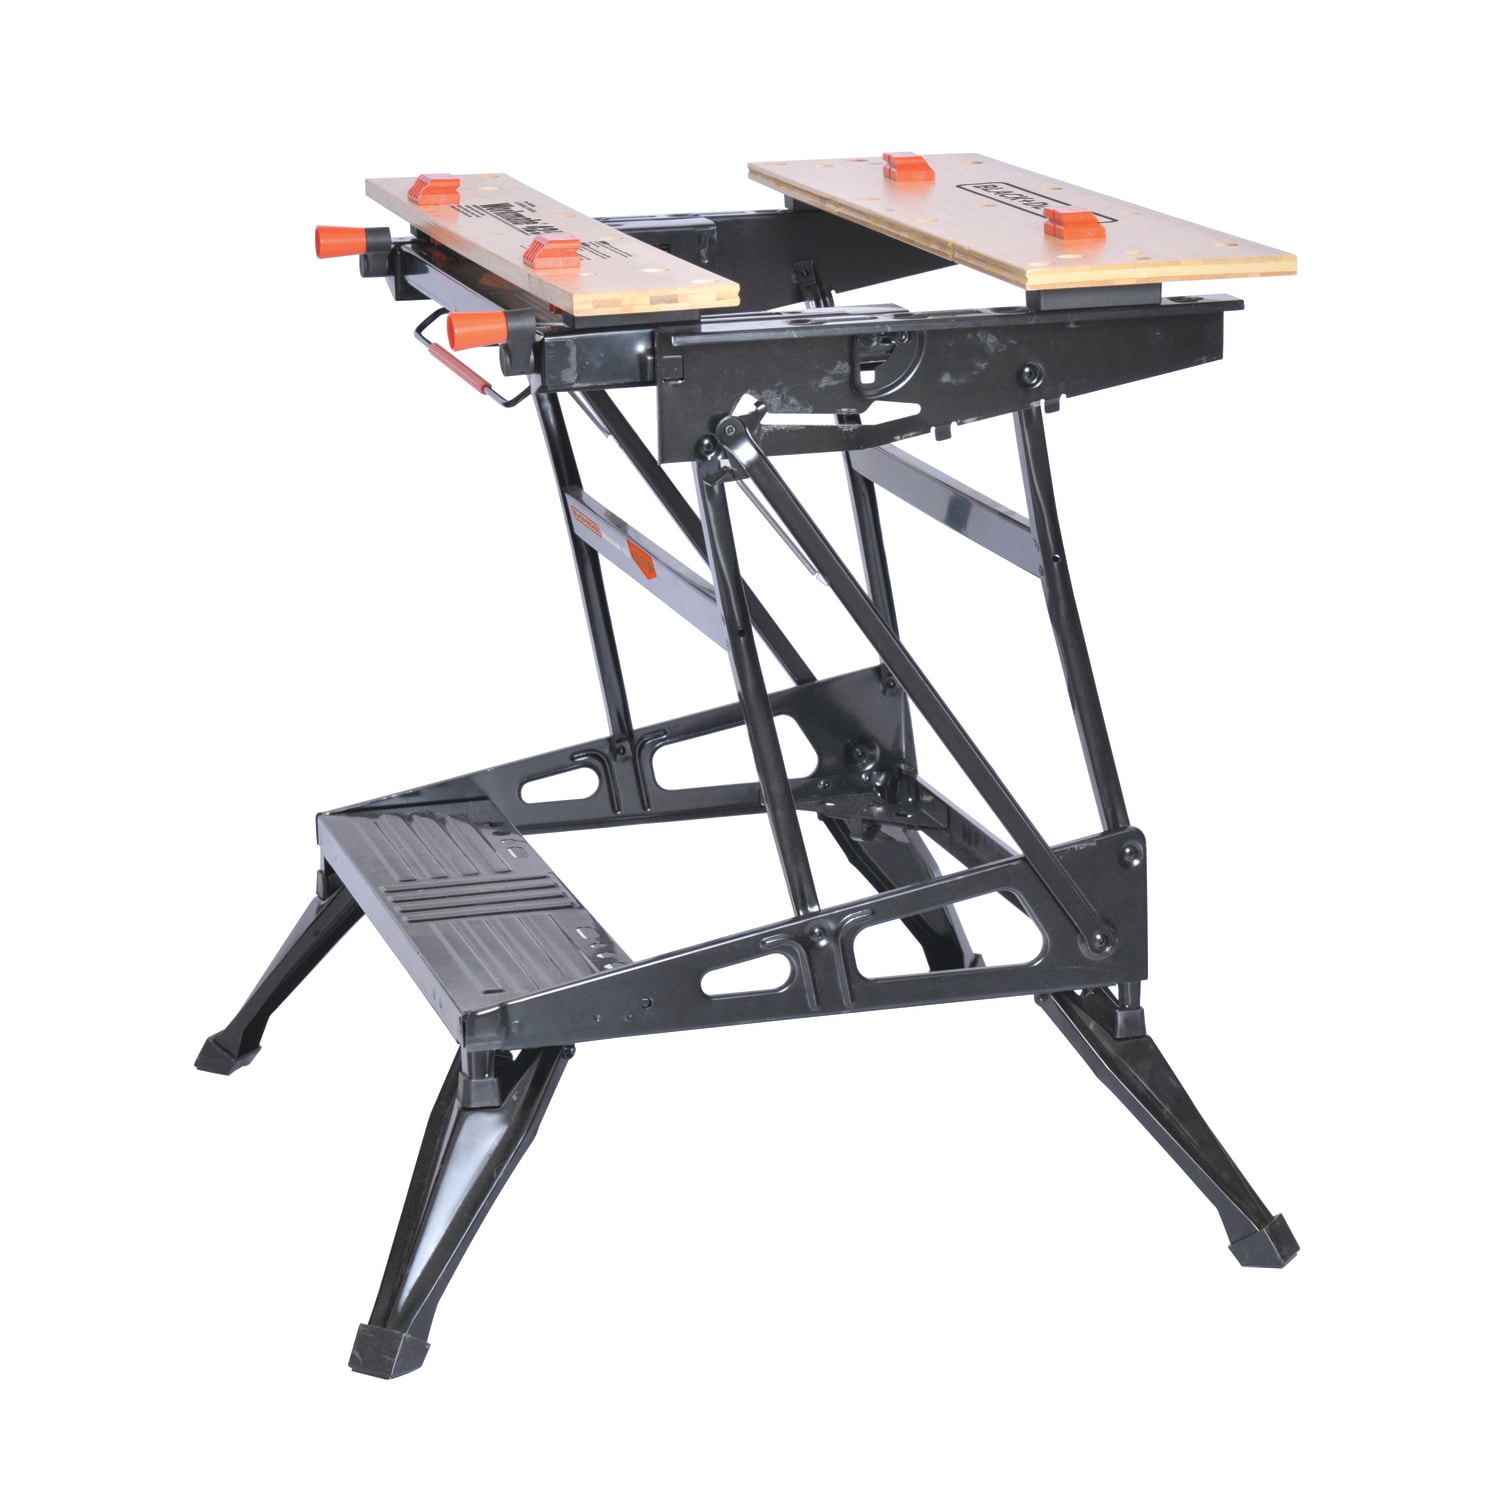 WOW! Black+Decker Portable Workbench Only $9.49 Shipped on